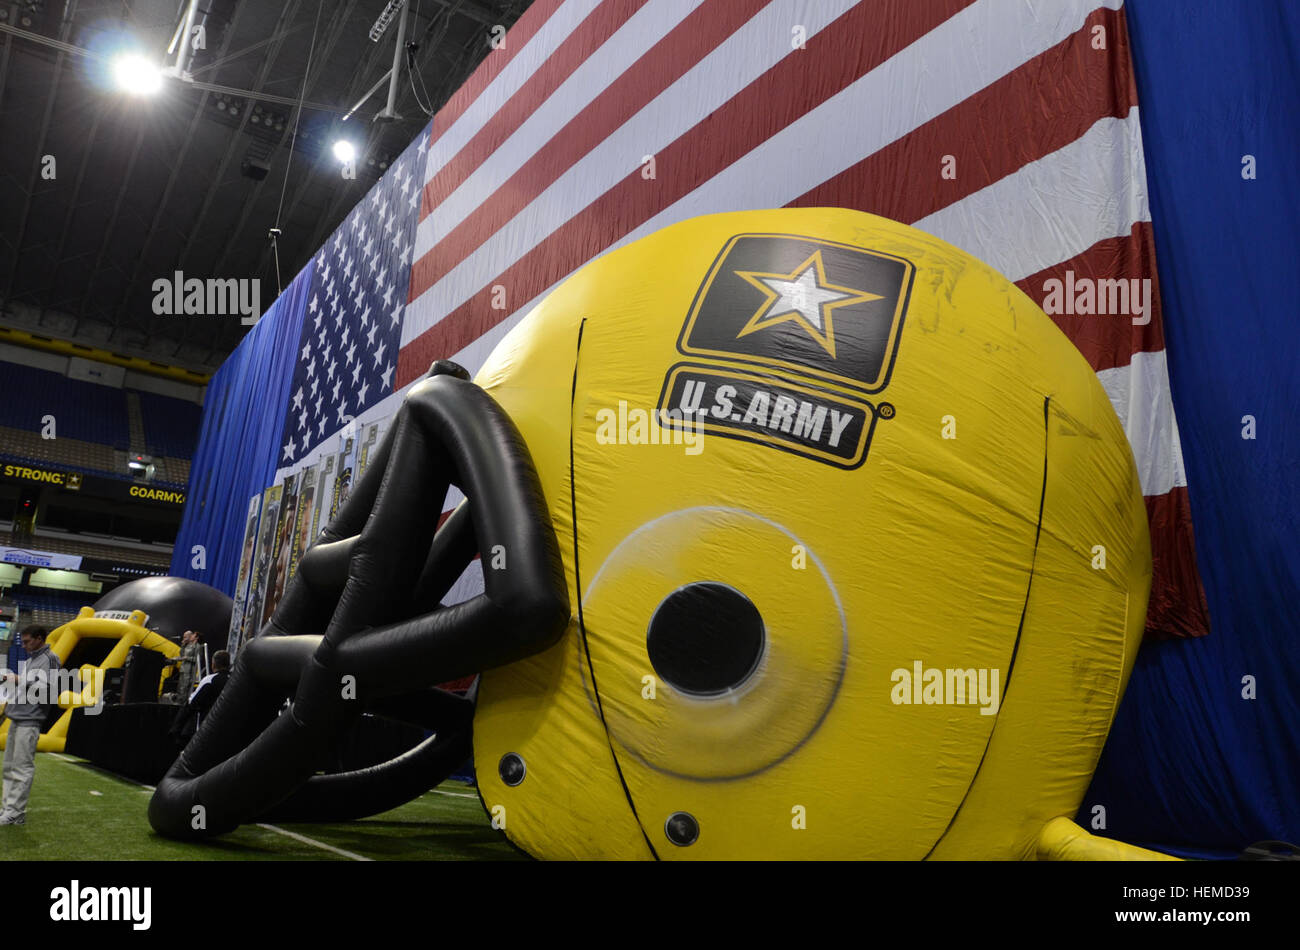 The American flag and balloon helmets, representing both teams participating in the 2013 U.S. Army All-American Bowl, were on display at the Alamodome in San Antonio Jan. 3, 2013. The displays were set up during a Texas-style barbecue dinner welcoming soldiers, student athletes and musicians, and their families. During the dinner, top high school marching band musicians, teachers and community members were recognized with awards for their accomplishments. The Army has hosted the All-American Bowl in San Antonio since 2002, highlighting the 90 best high school football players and 125 best high Stock Photo